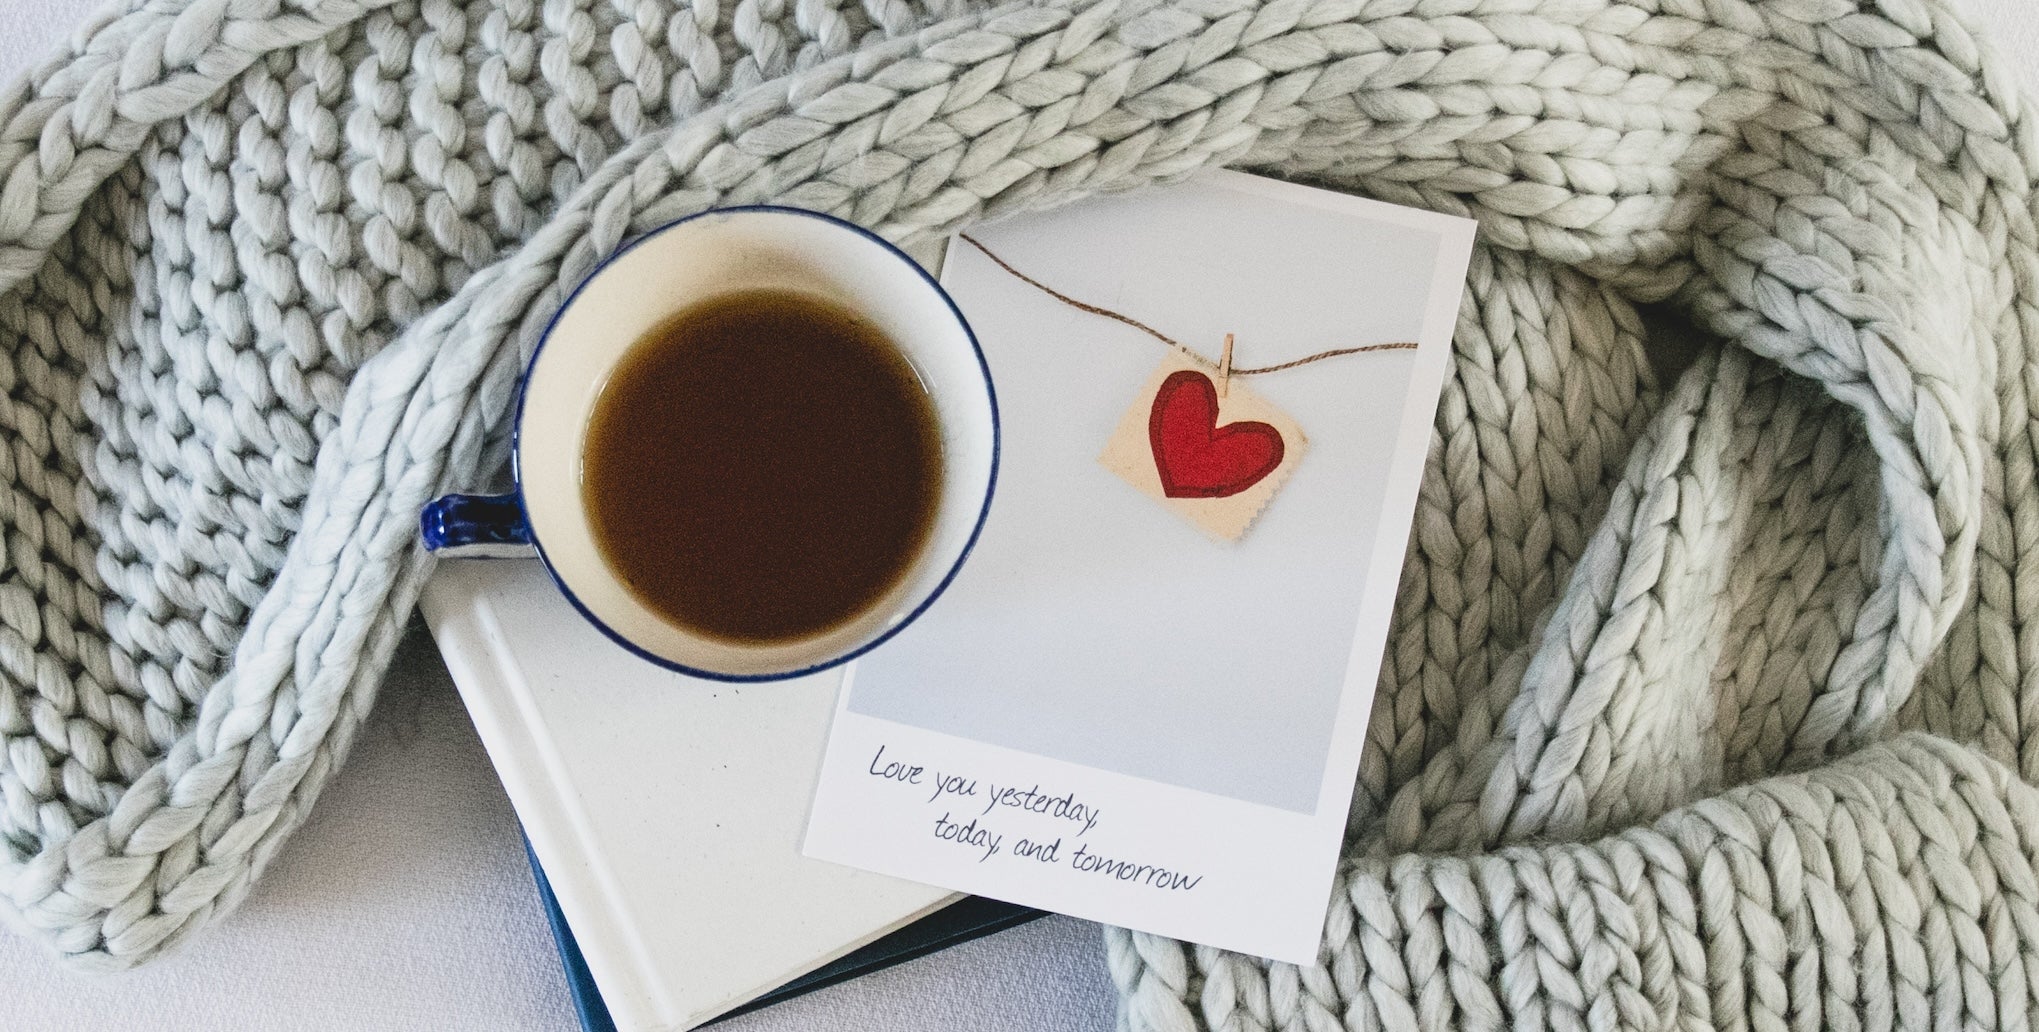 blanket with book, mug of tea, and valentine's card